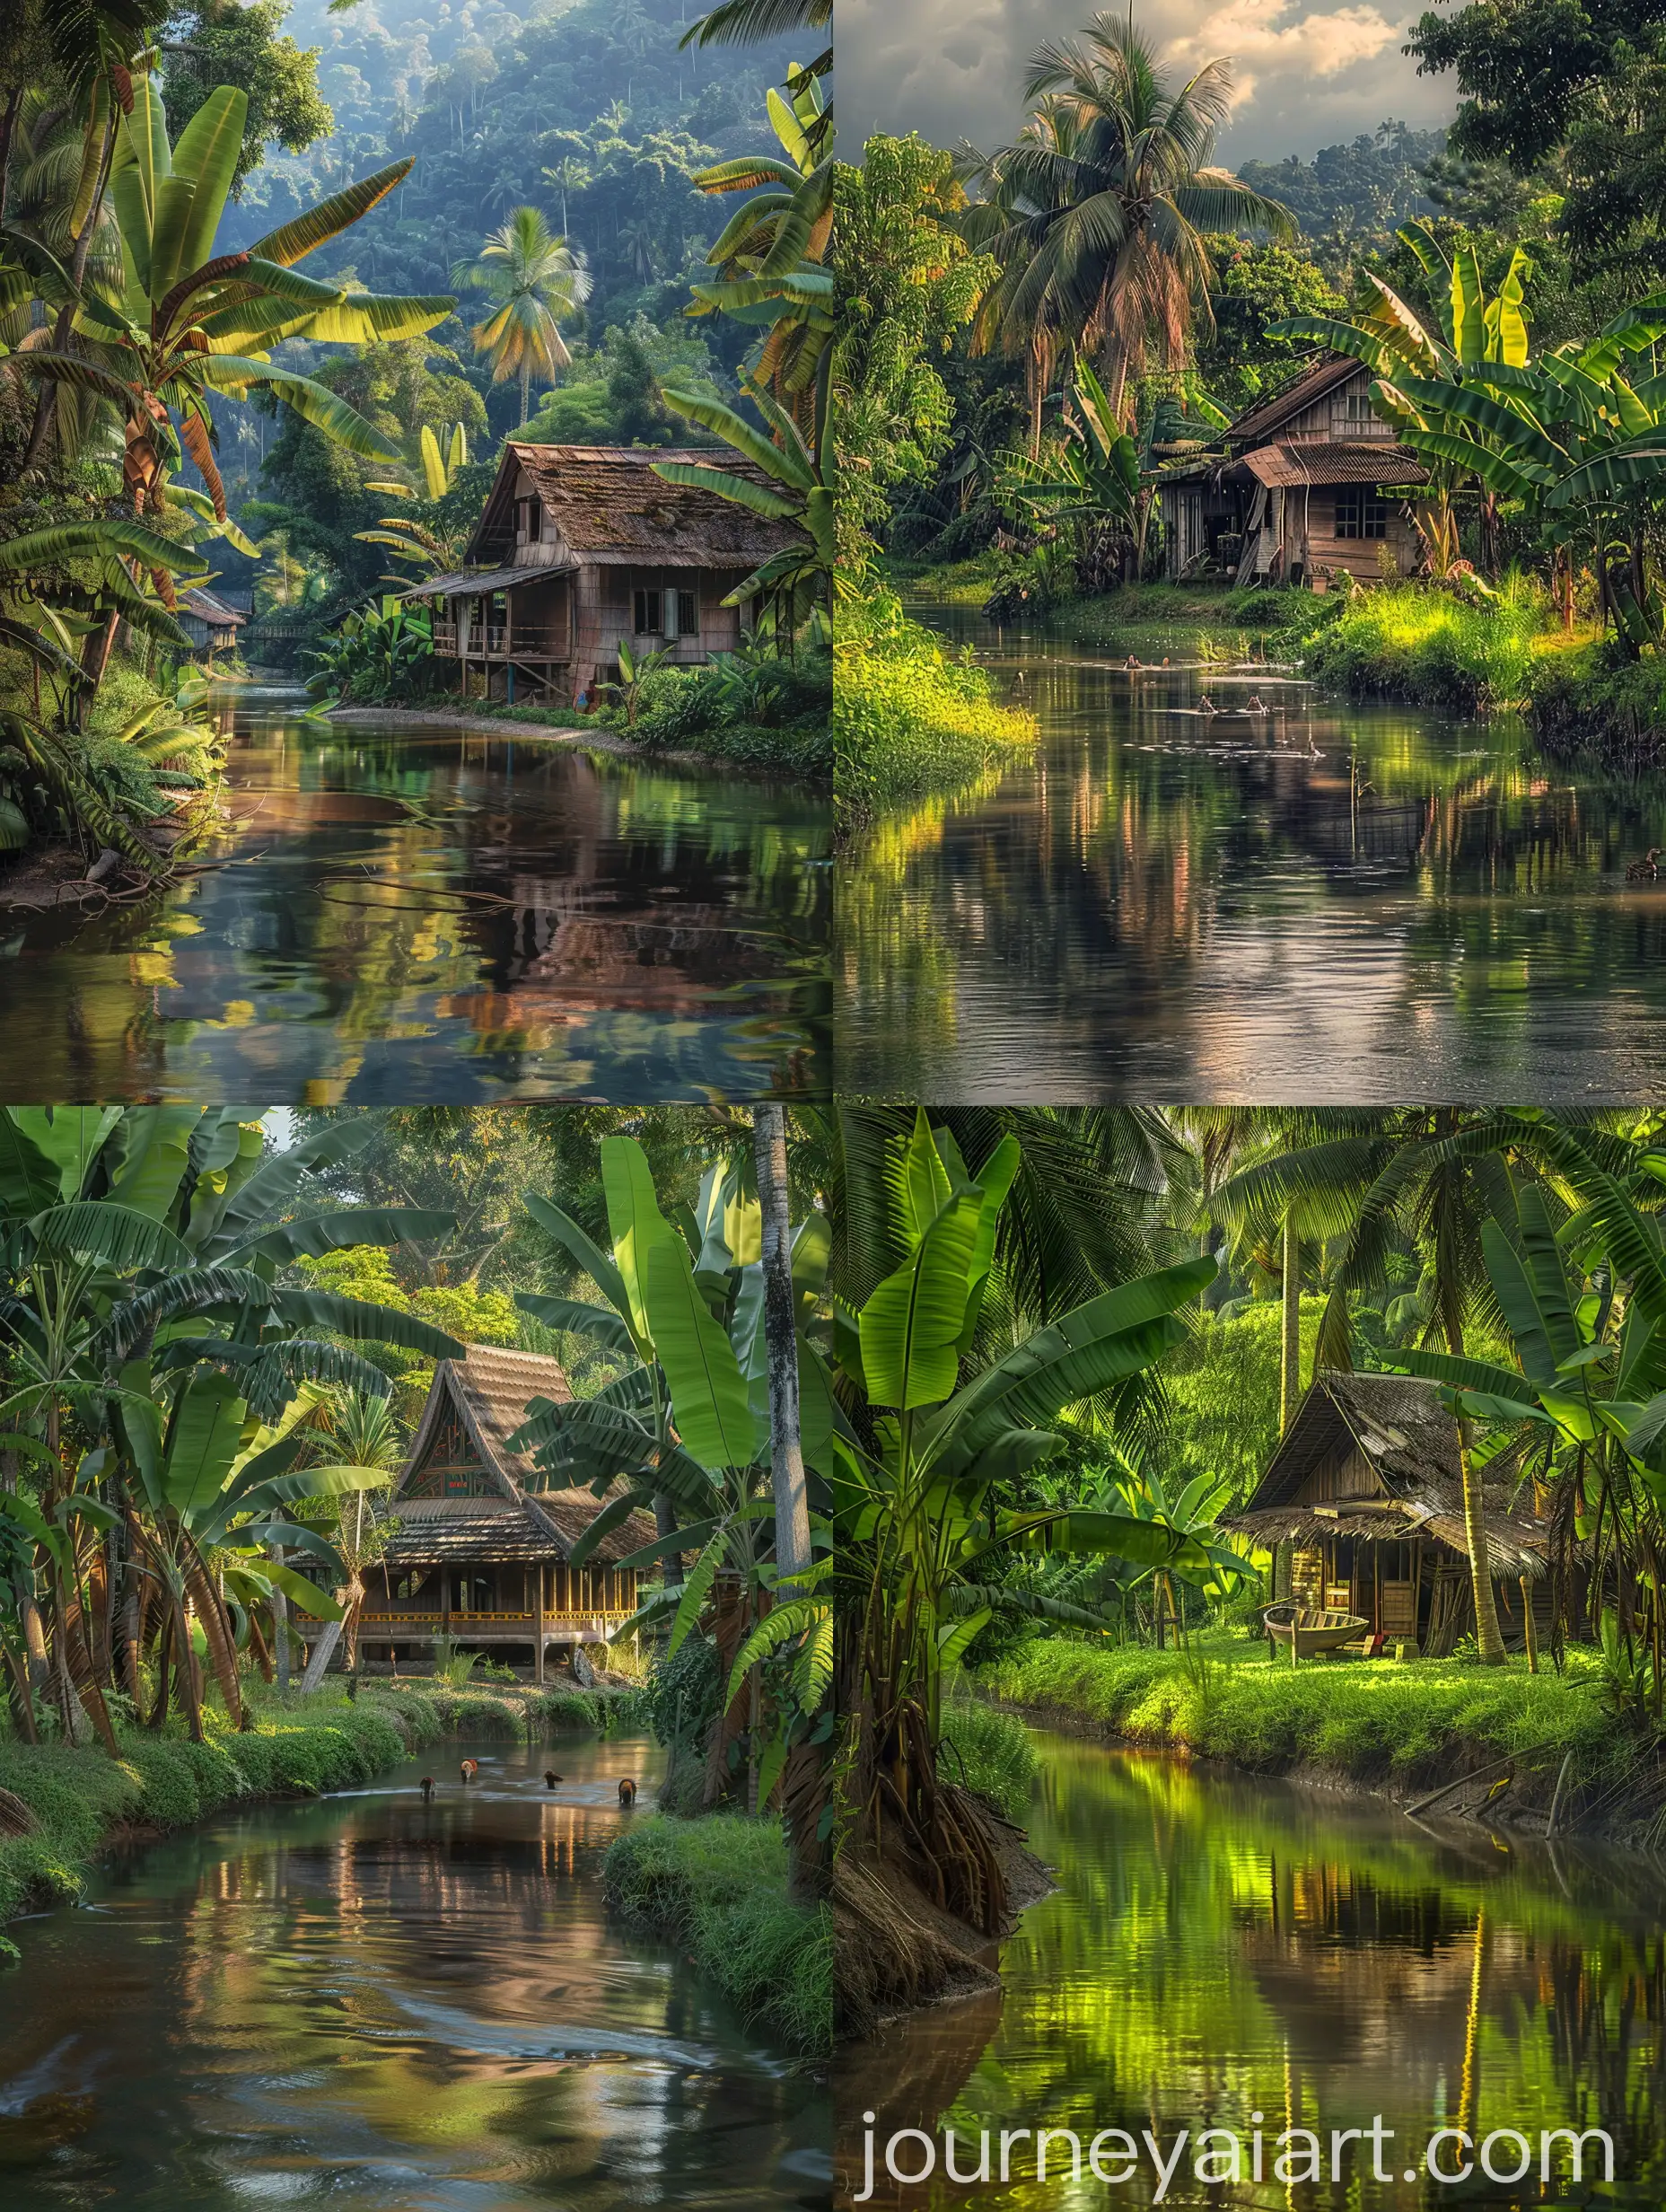 Hyperrealistic-Photograph-of-an-Old-Thai-Village-with-Banana-Trees-and-Thatched-Roof-House